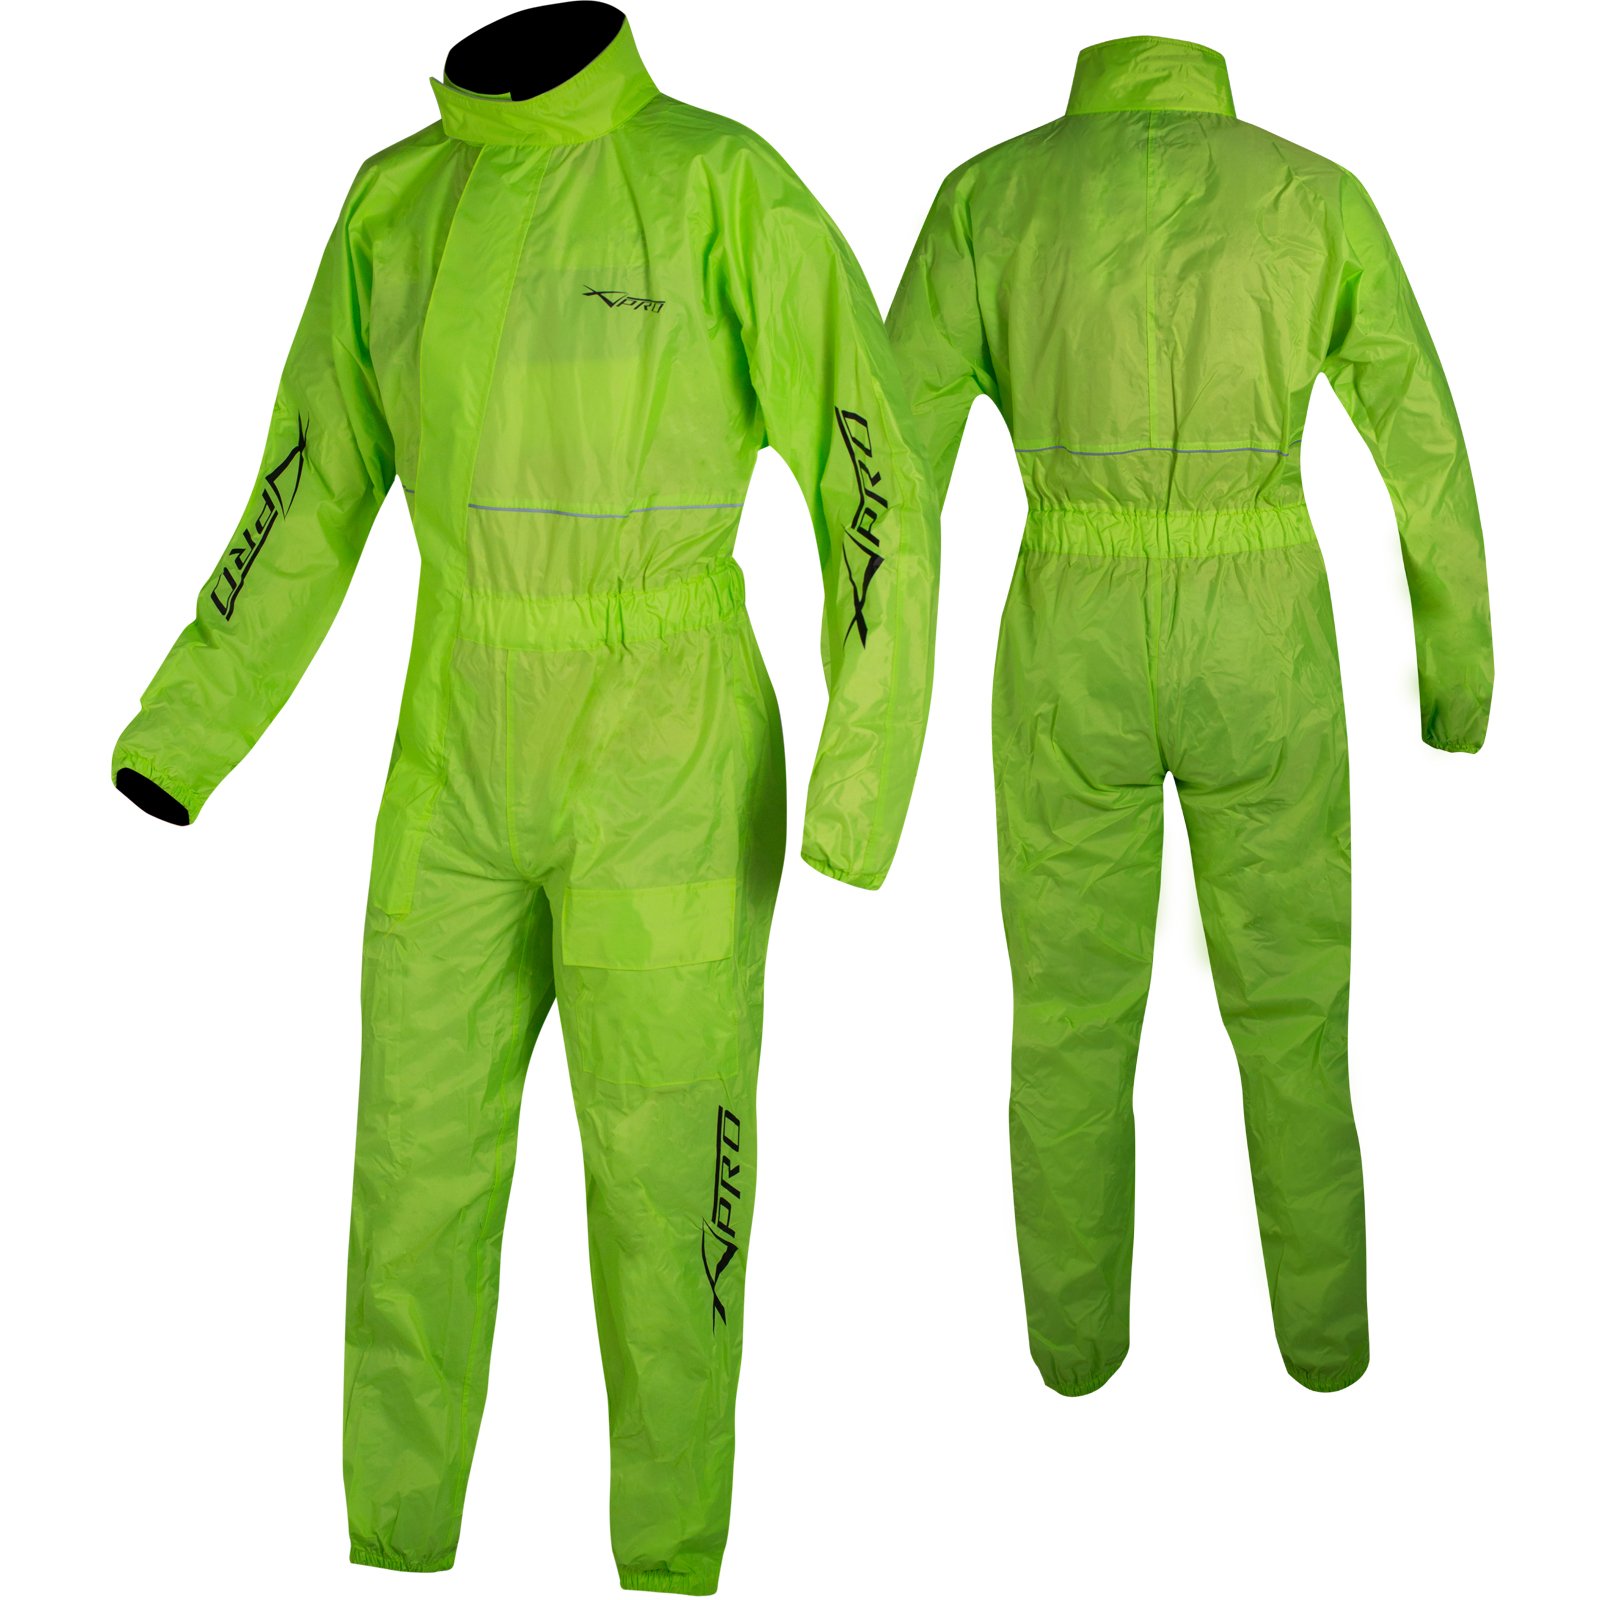 A-Pro Motorcycle Motorbike Waterproof Full Body One 1 pc Rain Over Suit Fluo M von A-Pro